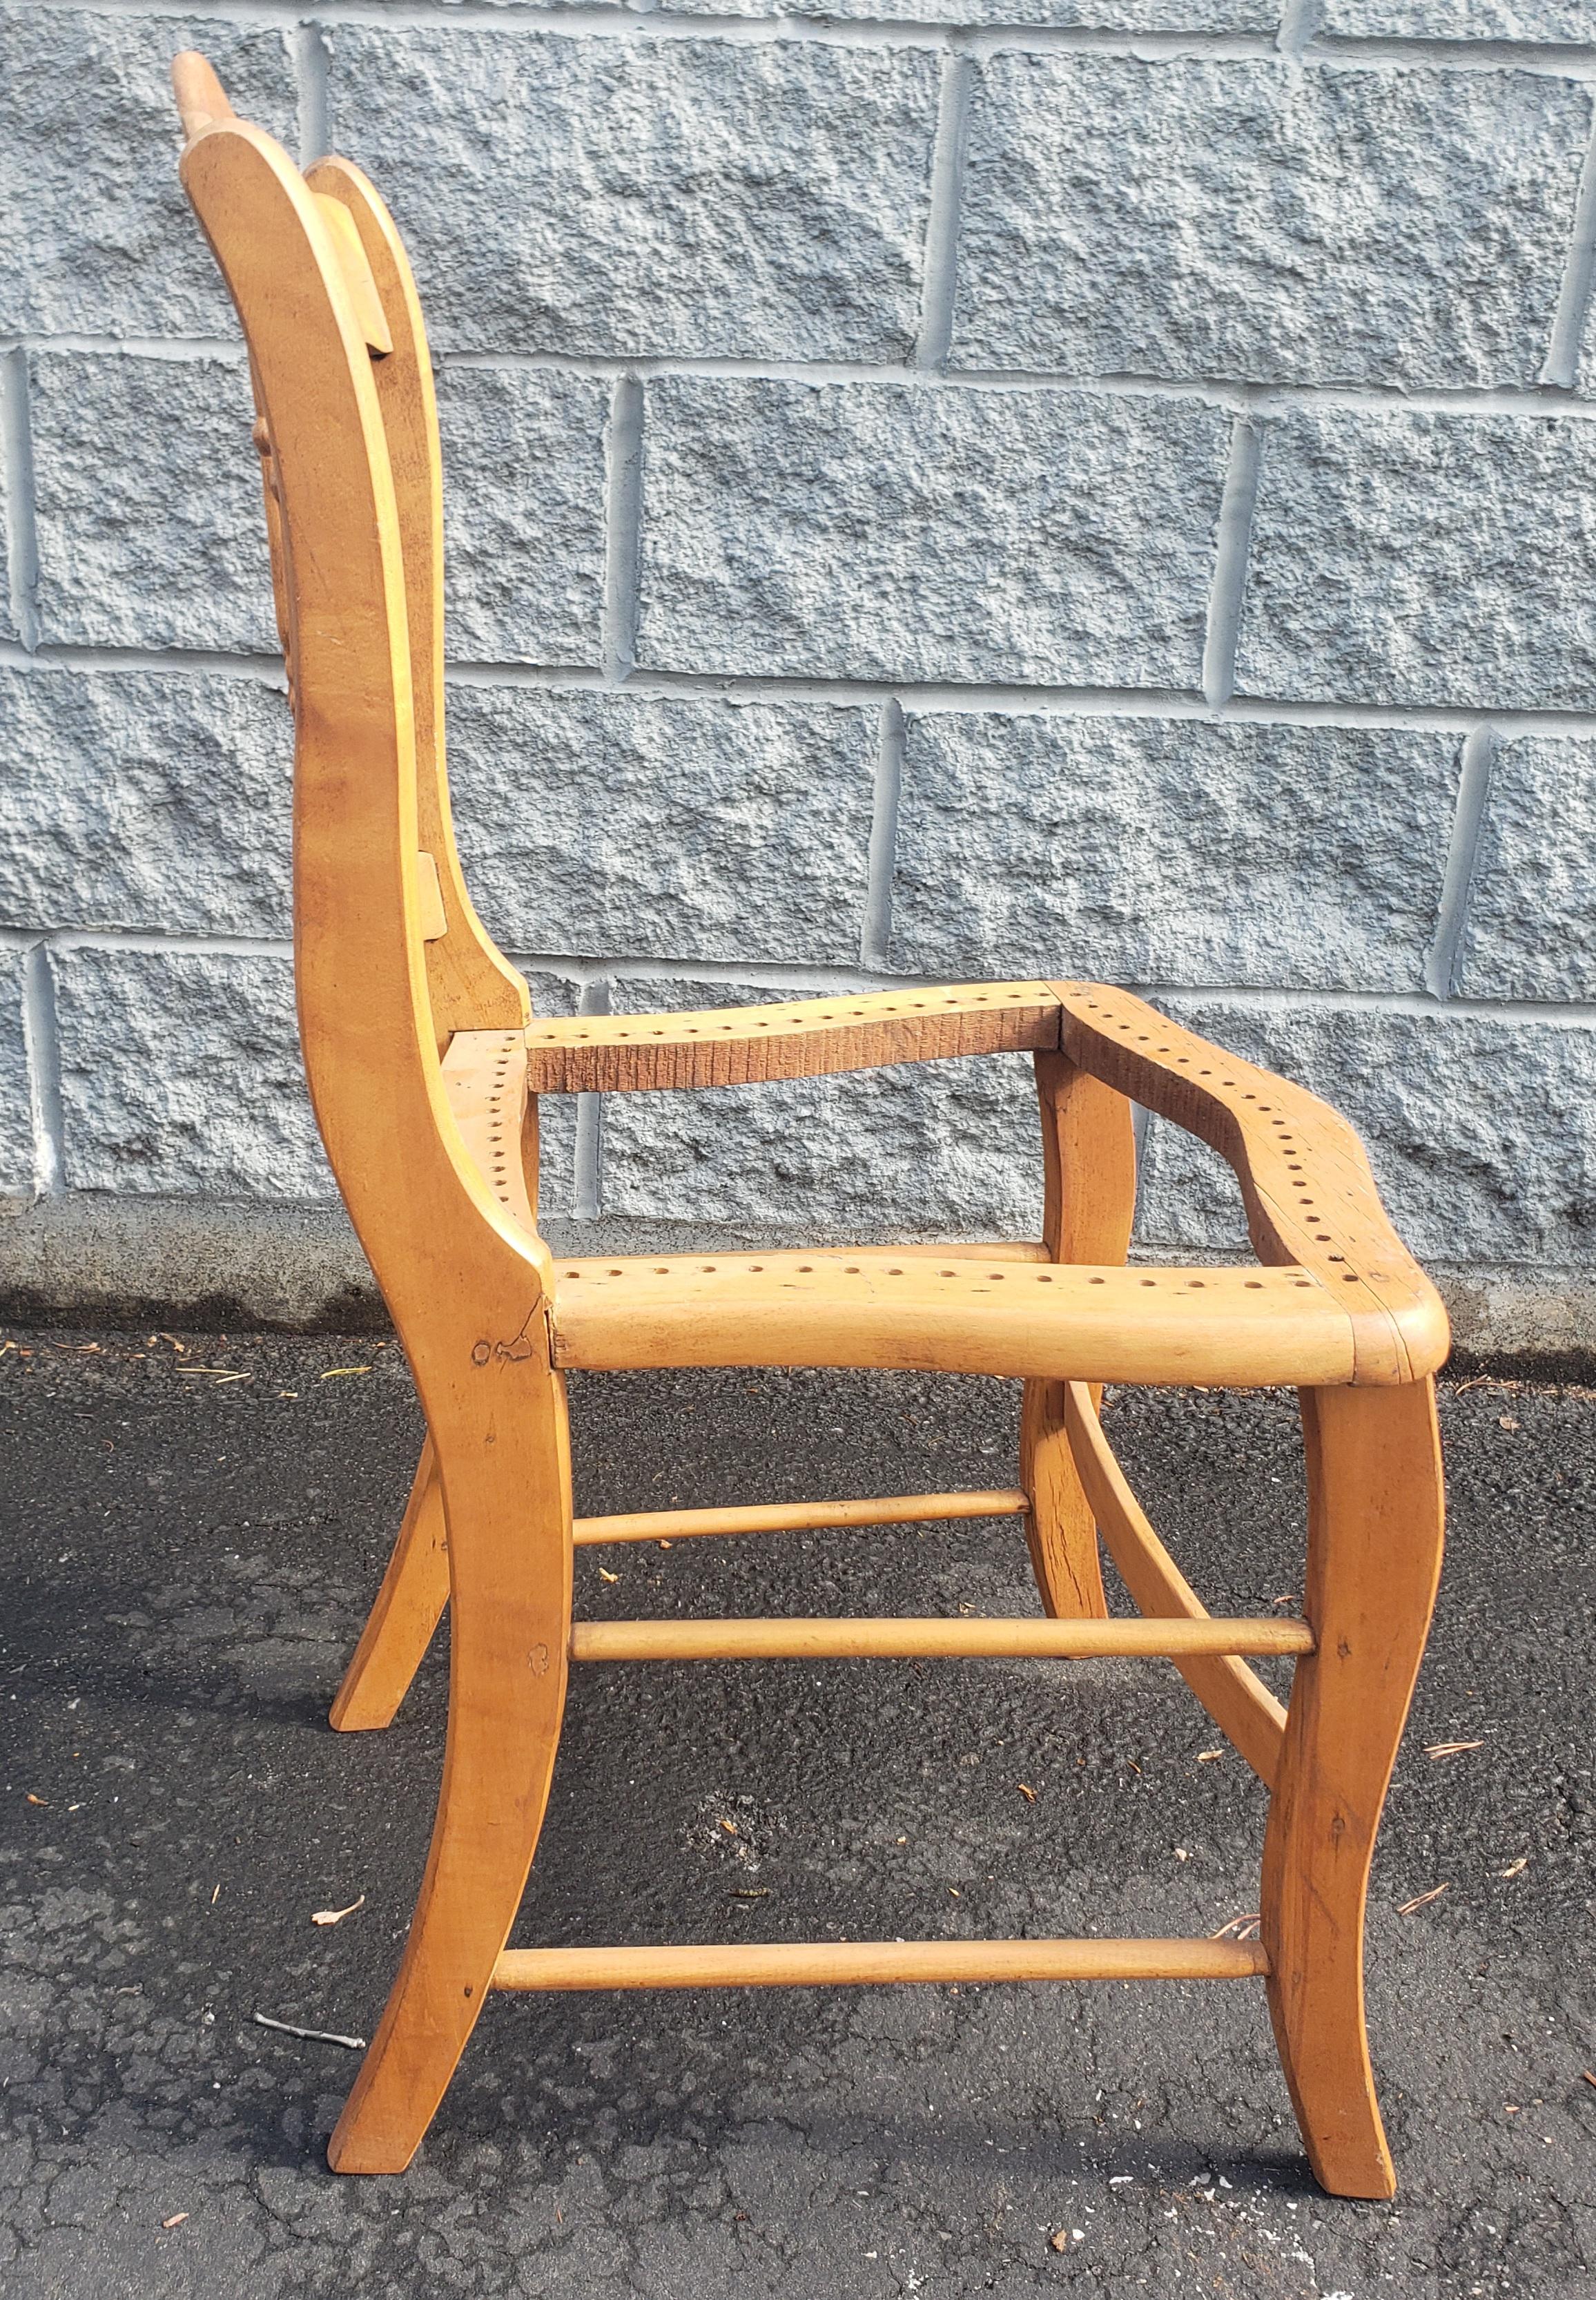 wooden chair frames for sale